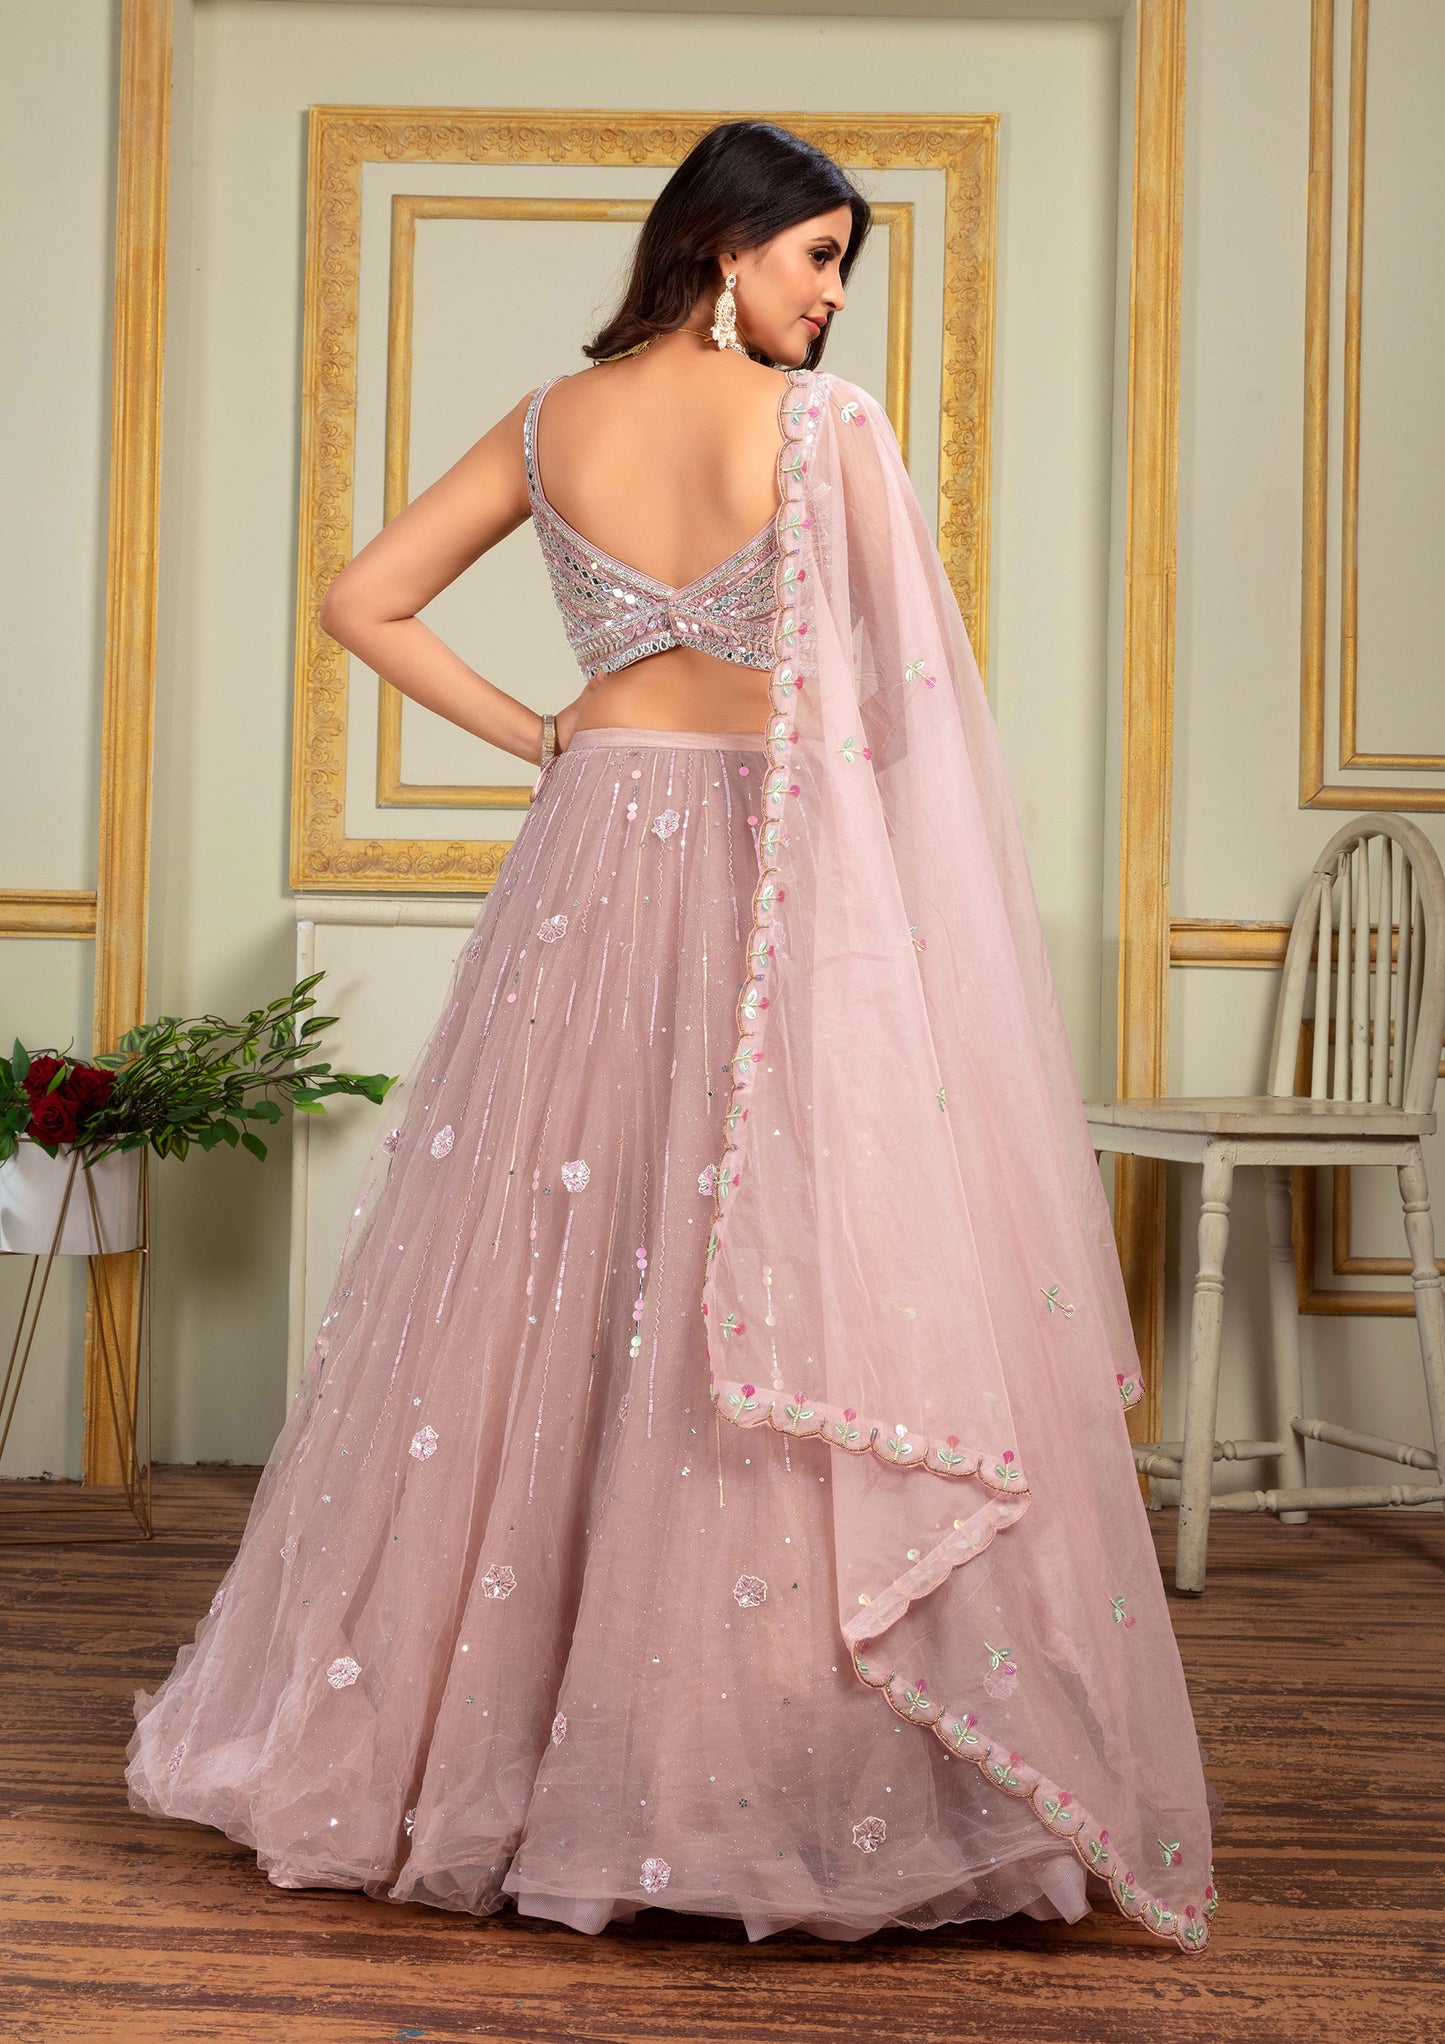 Pink lehenga with floral hand work and net fabric, perfect for a special occasion.